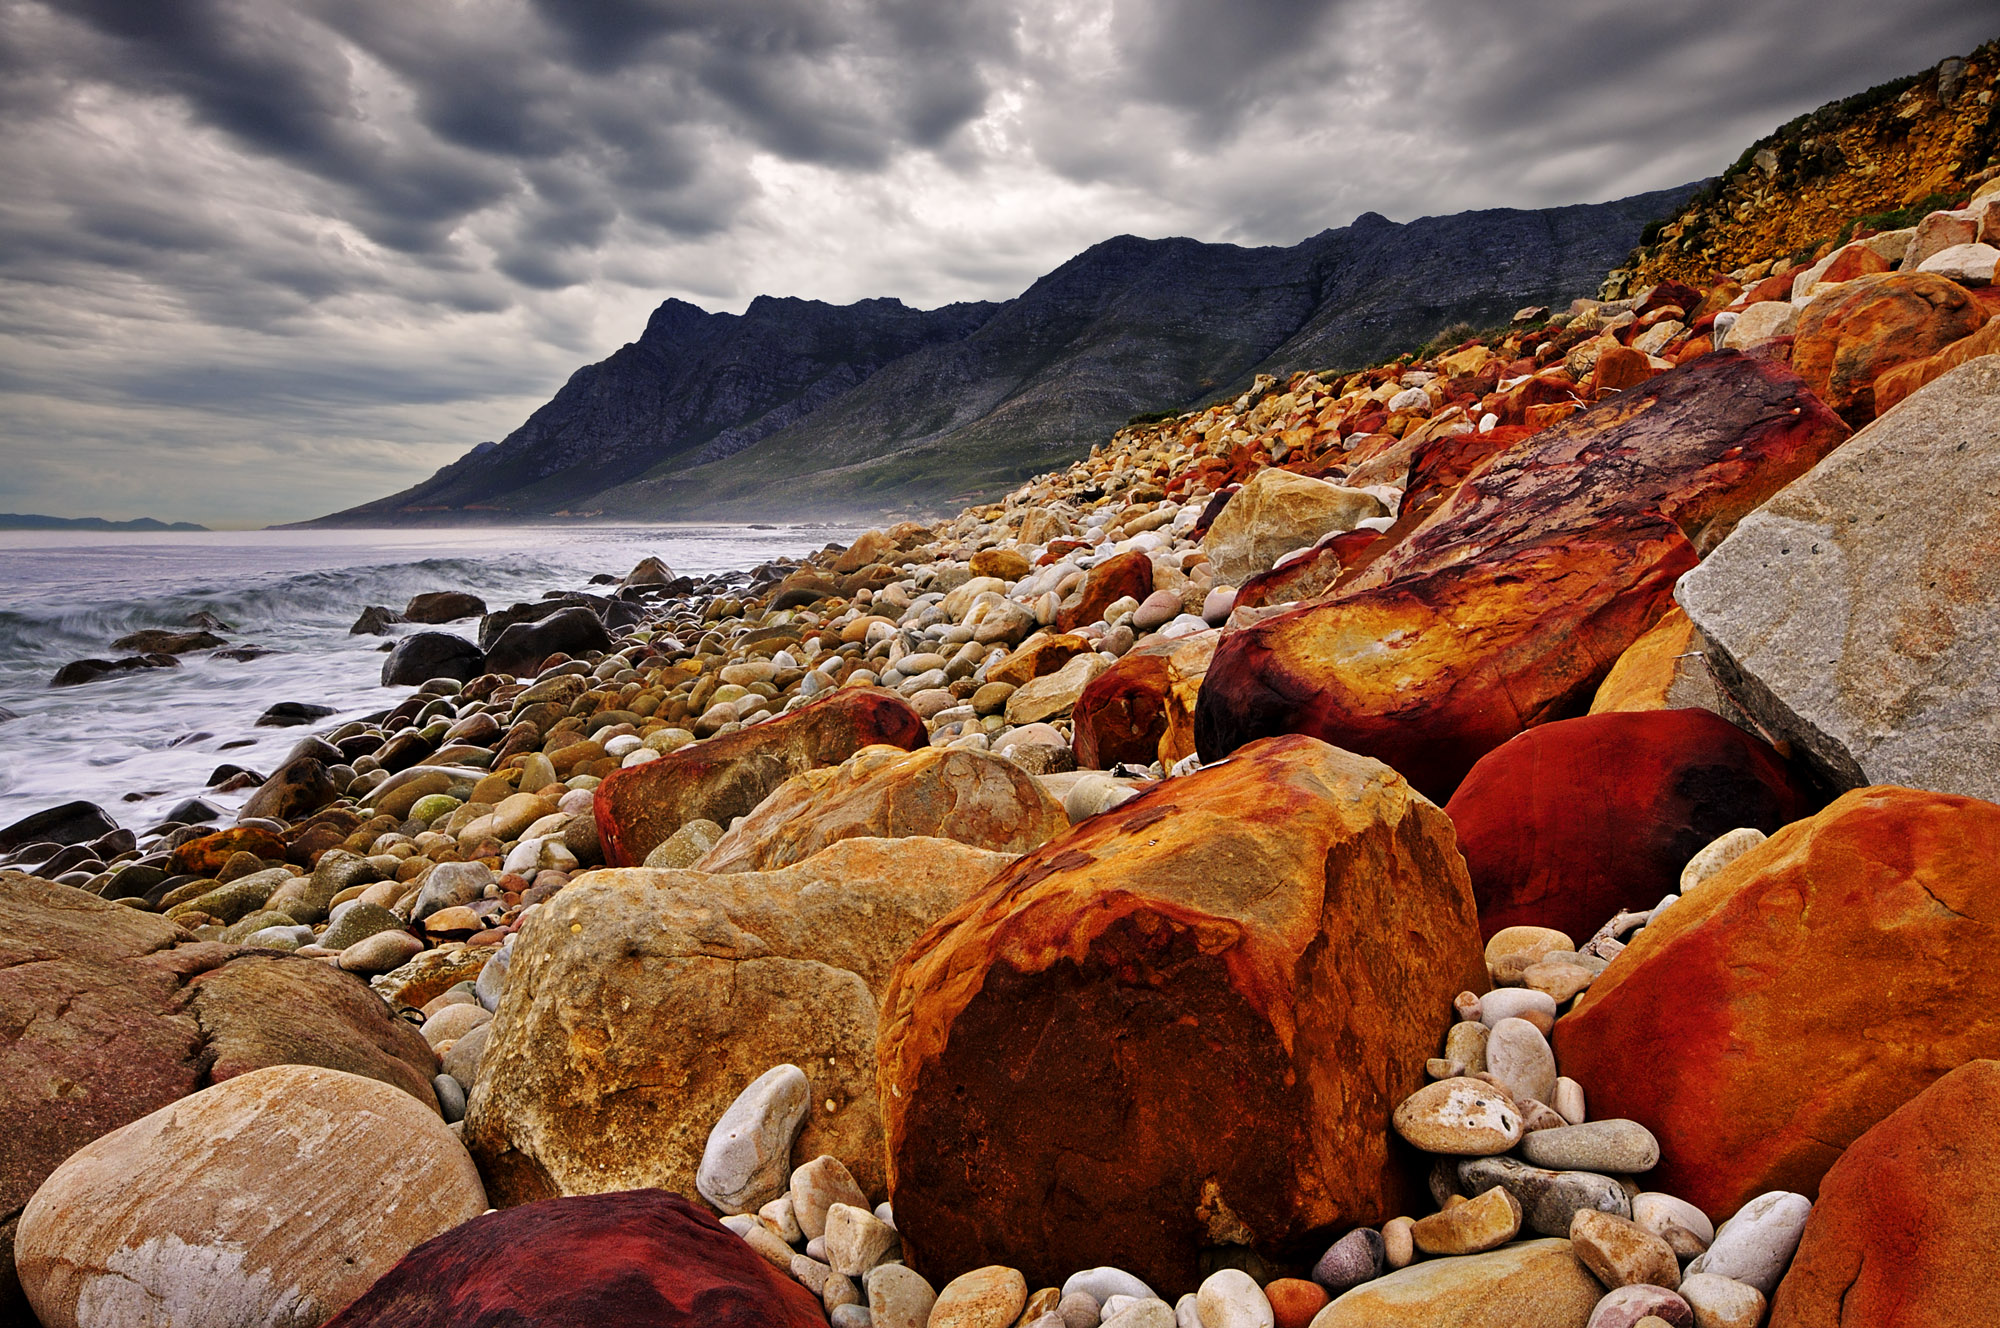 Seascape opportunities photographing SA